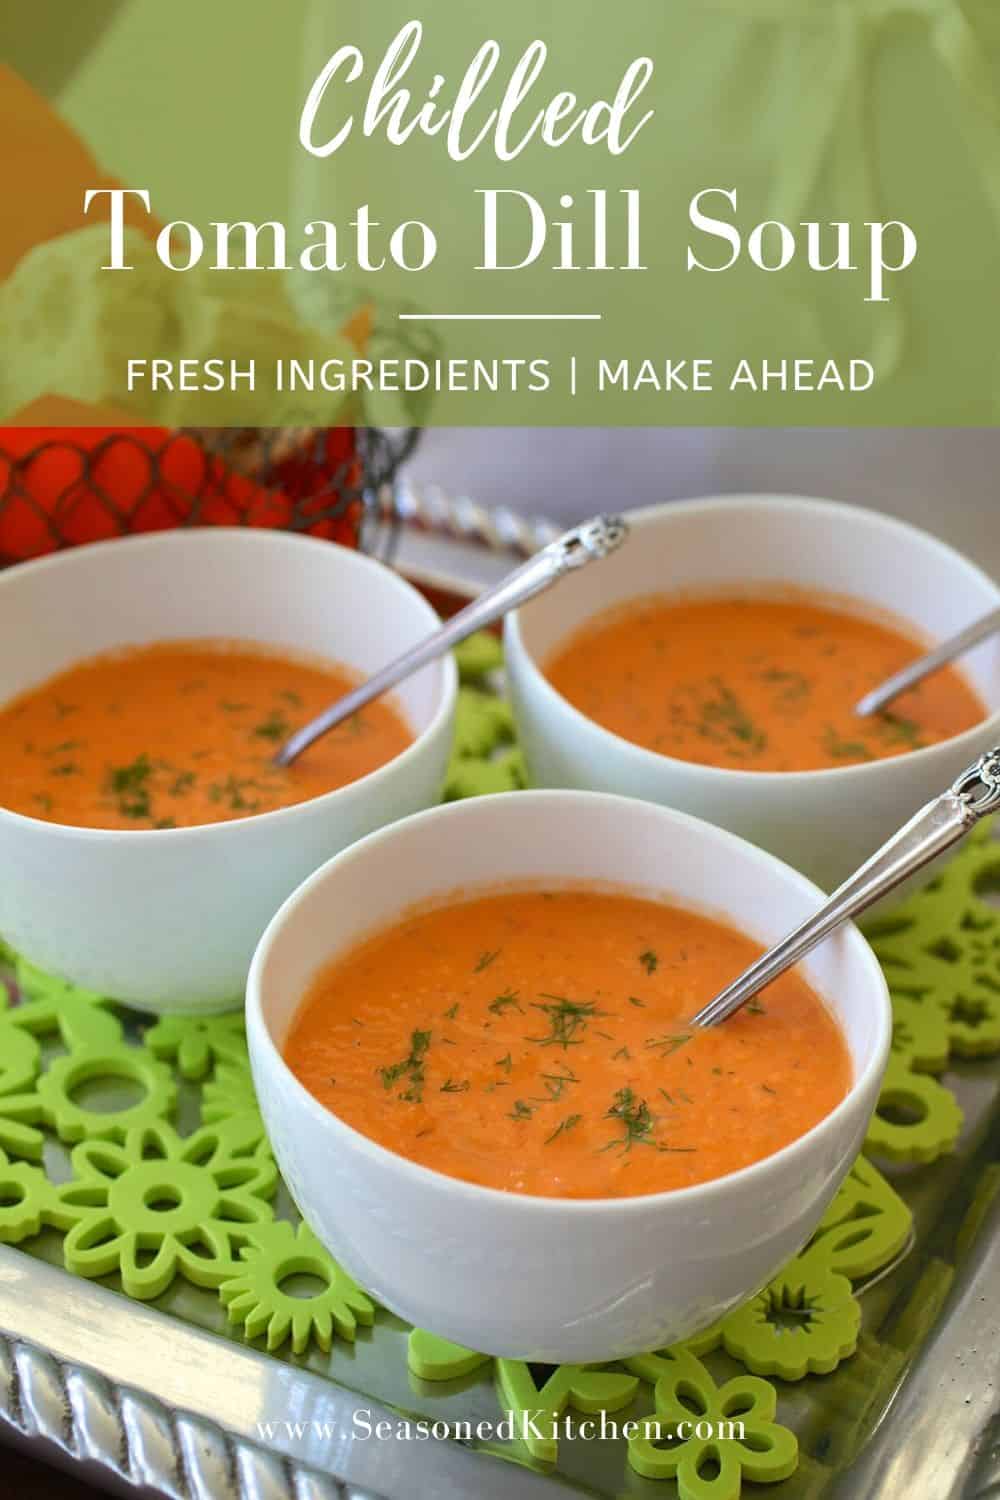 Pin of Chilled Tomato Dill Soup for posting on Pinterest